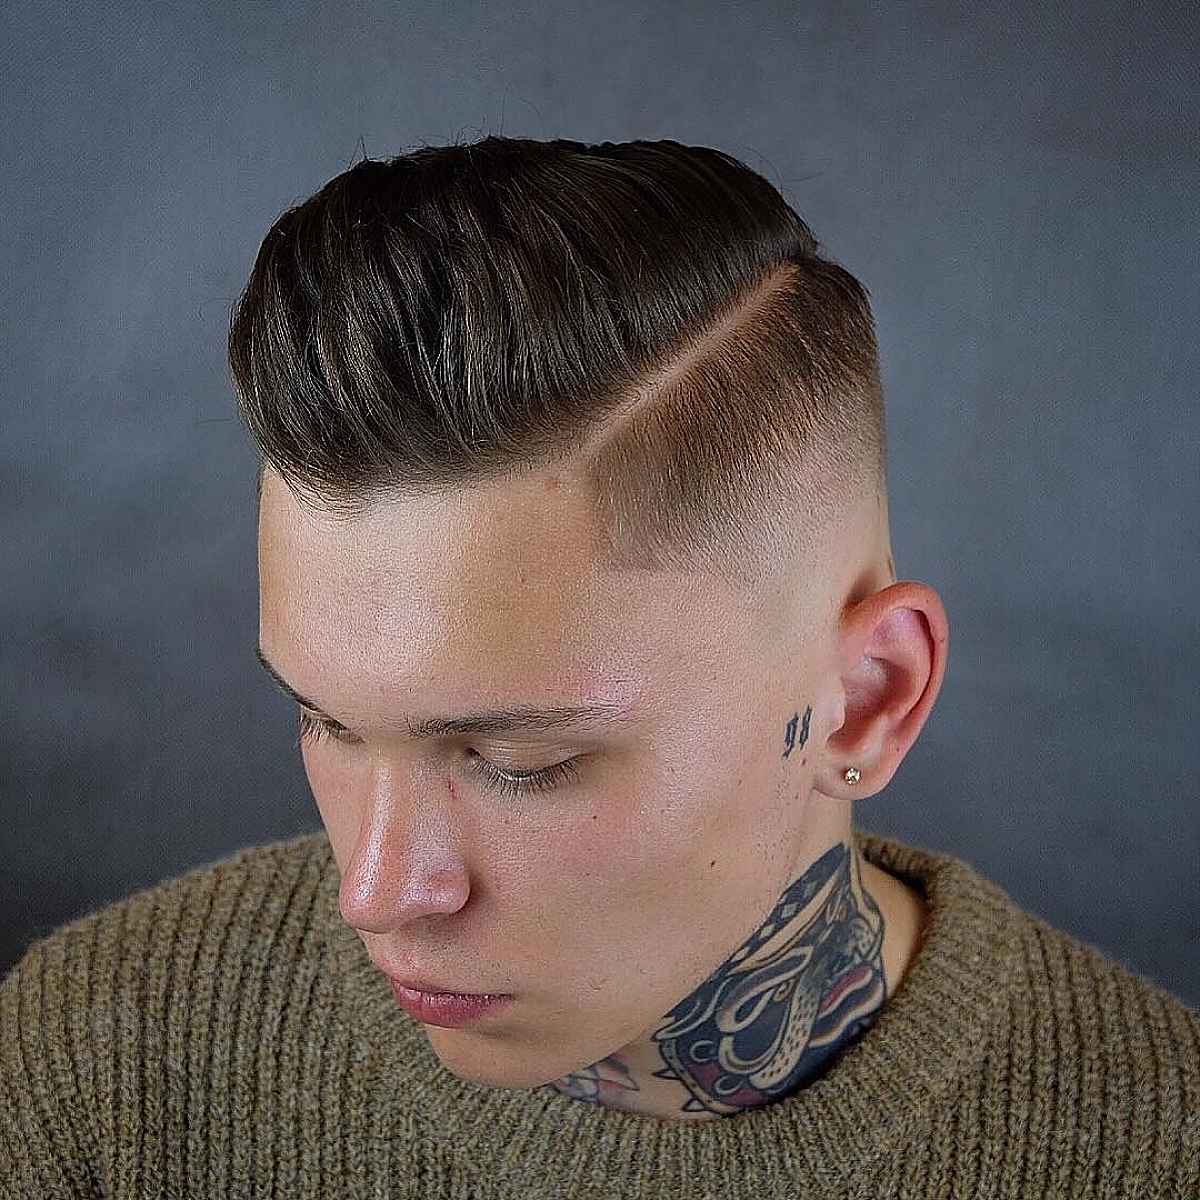 Vintage low mid fade with a side part